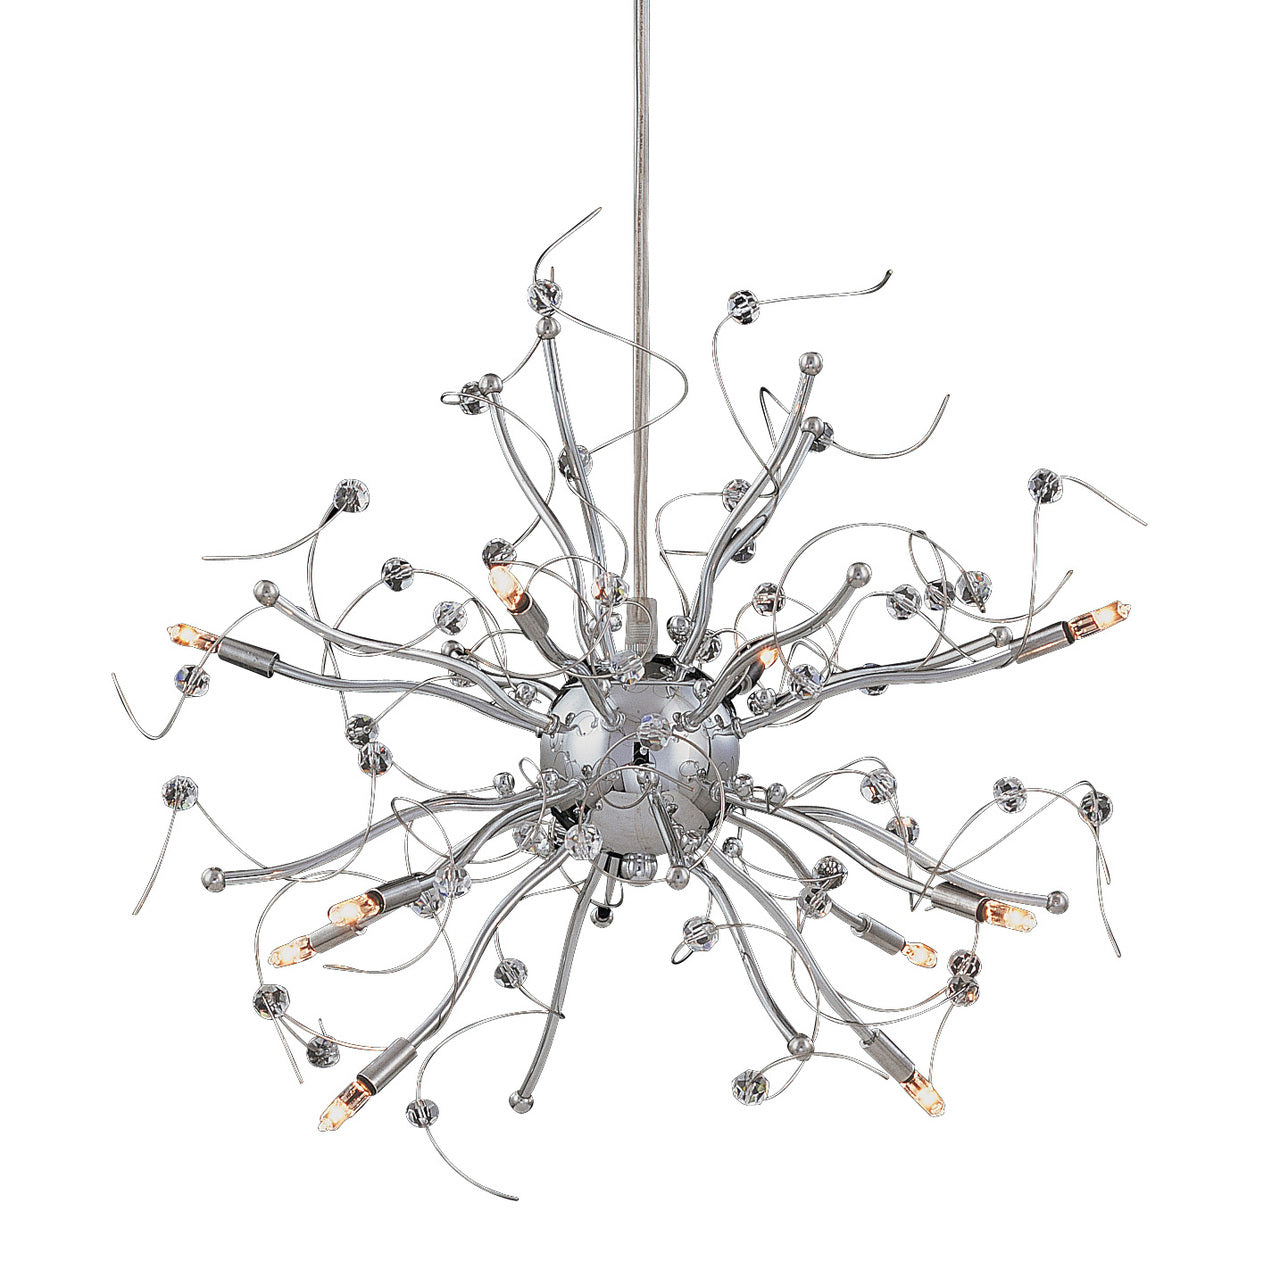 Classic Lighting 16070 CH Nitro Crystal Chandelier in Chrome